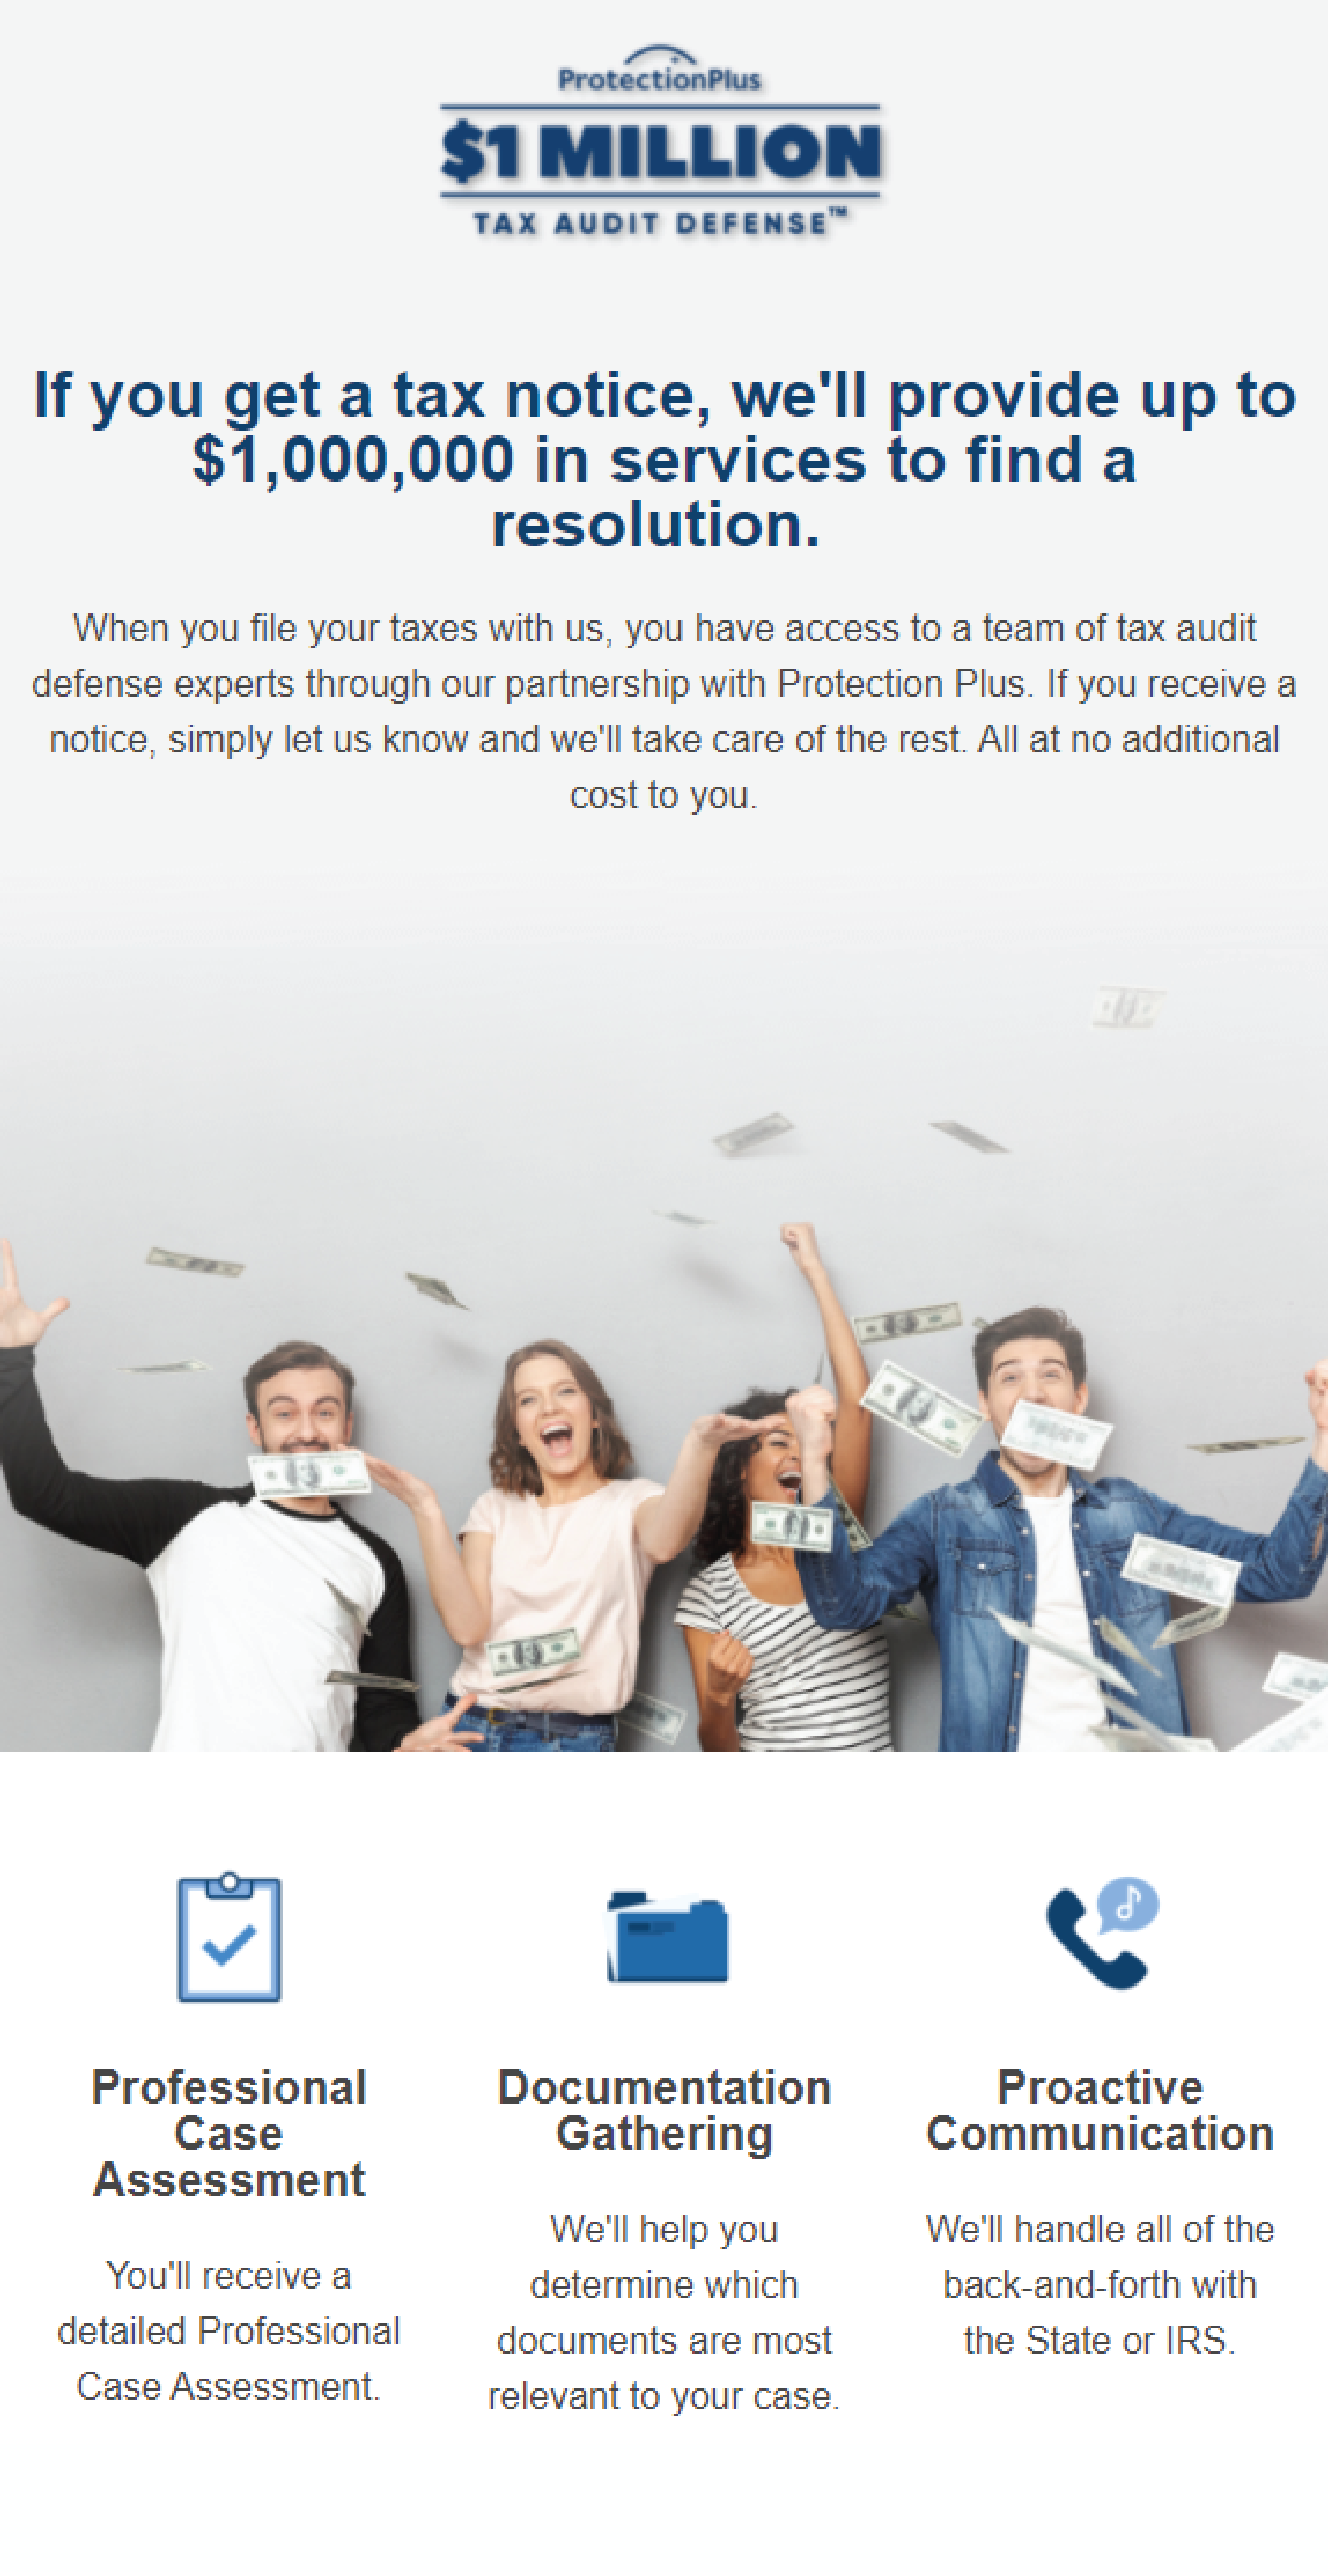 Protection Plus Marketing Materials - Audit Assistance and ID